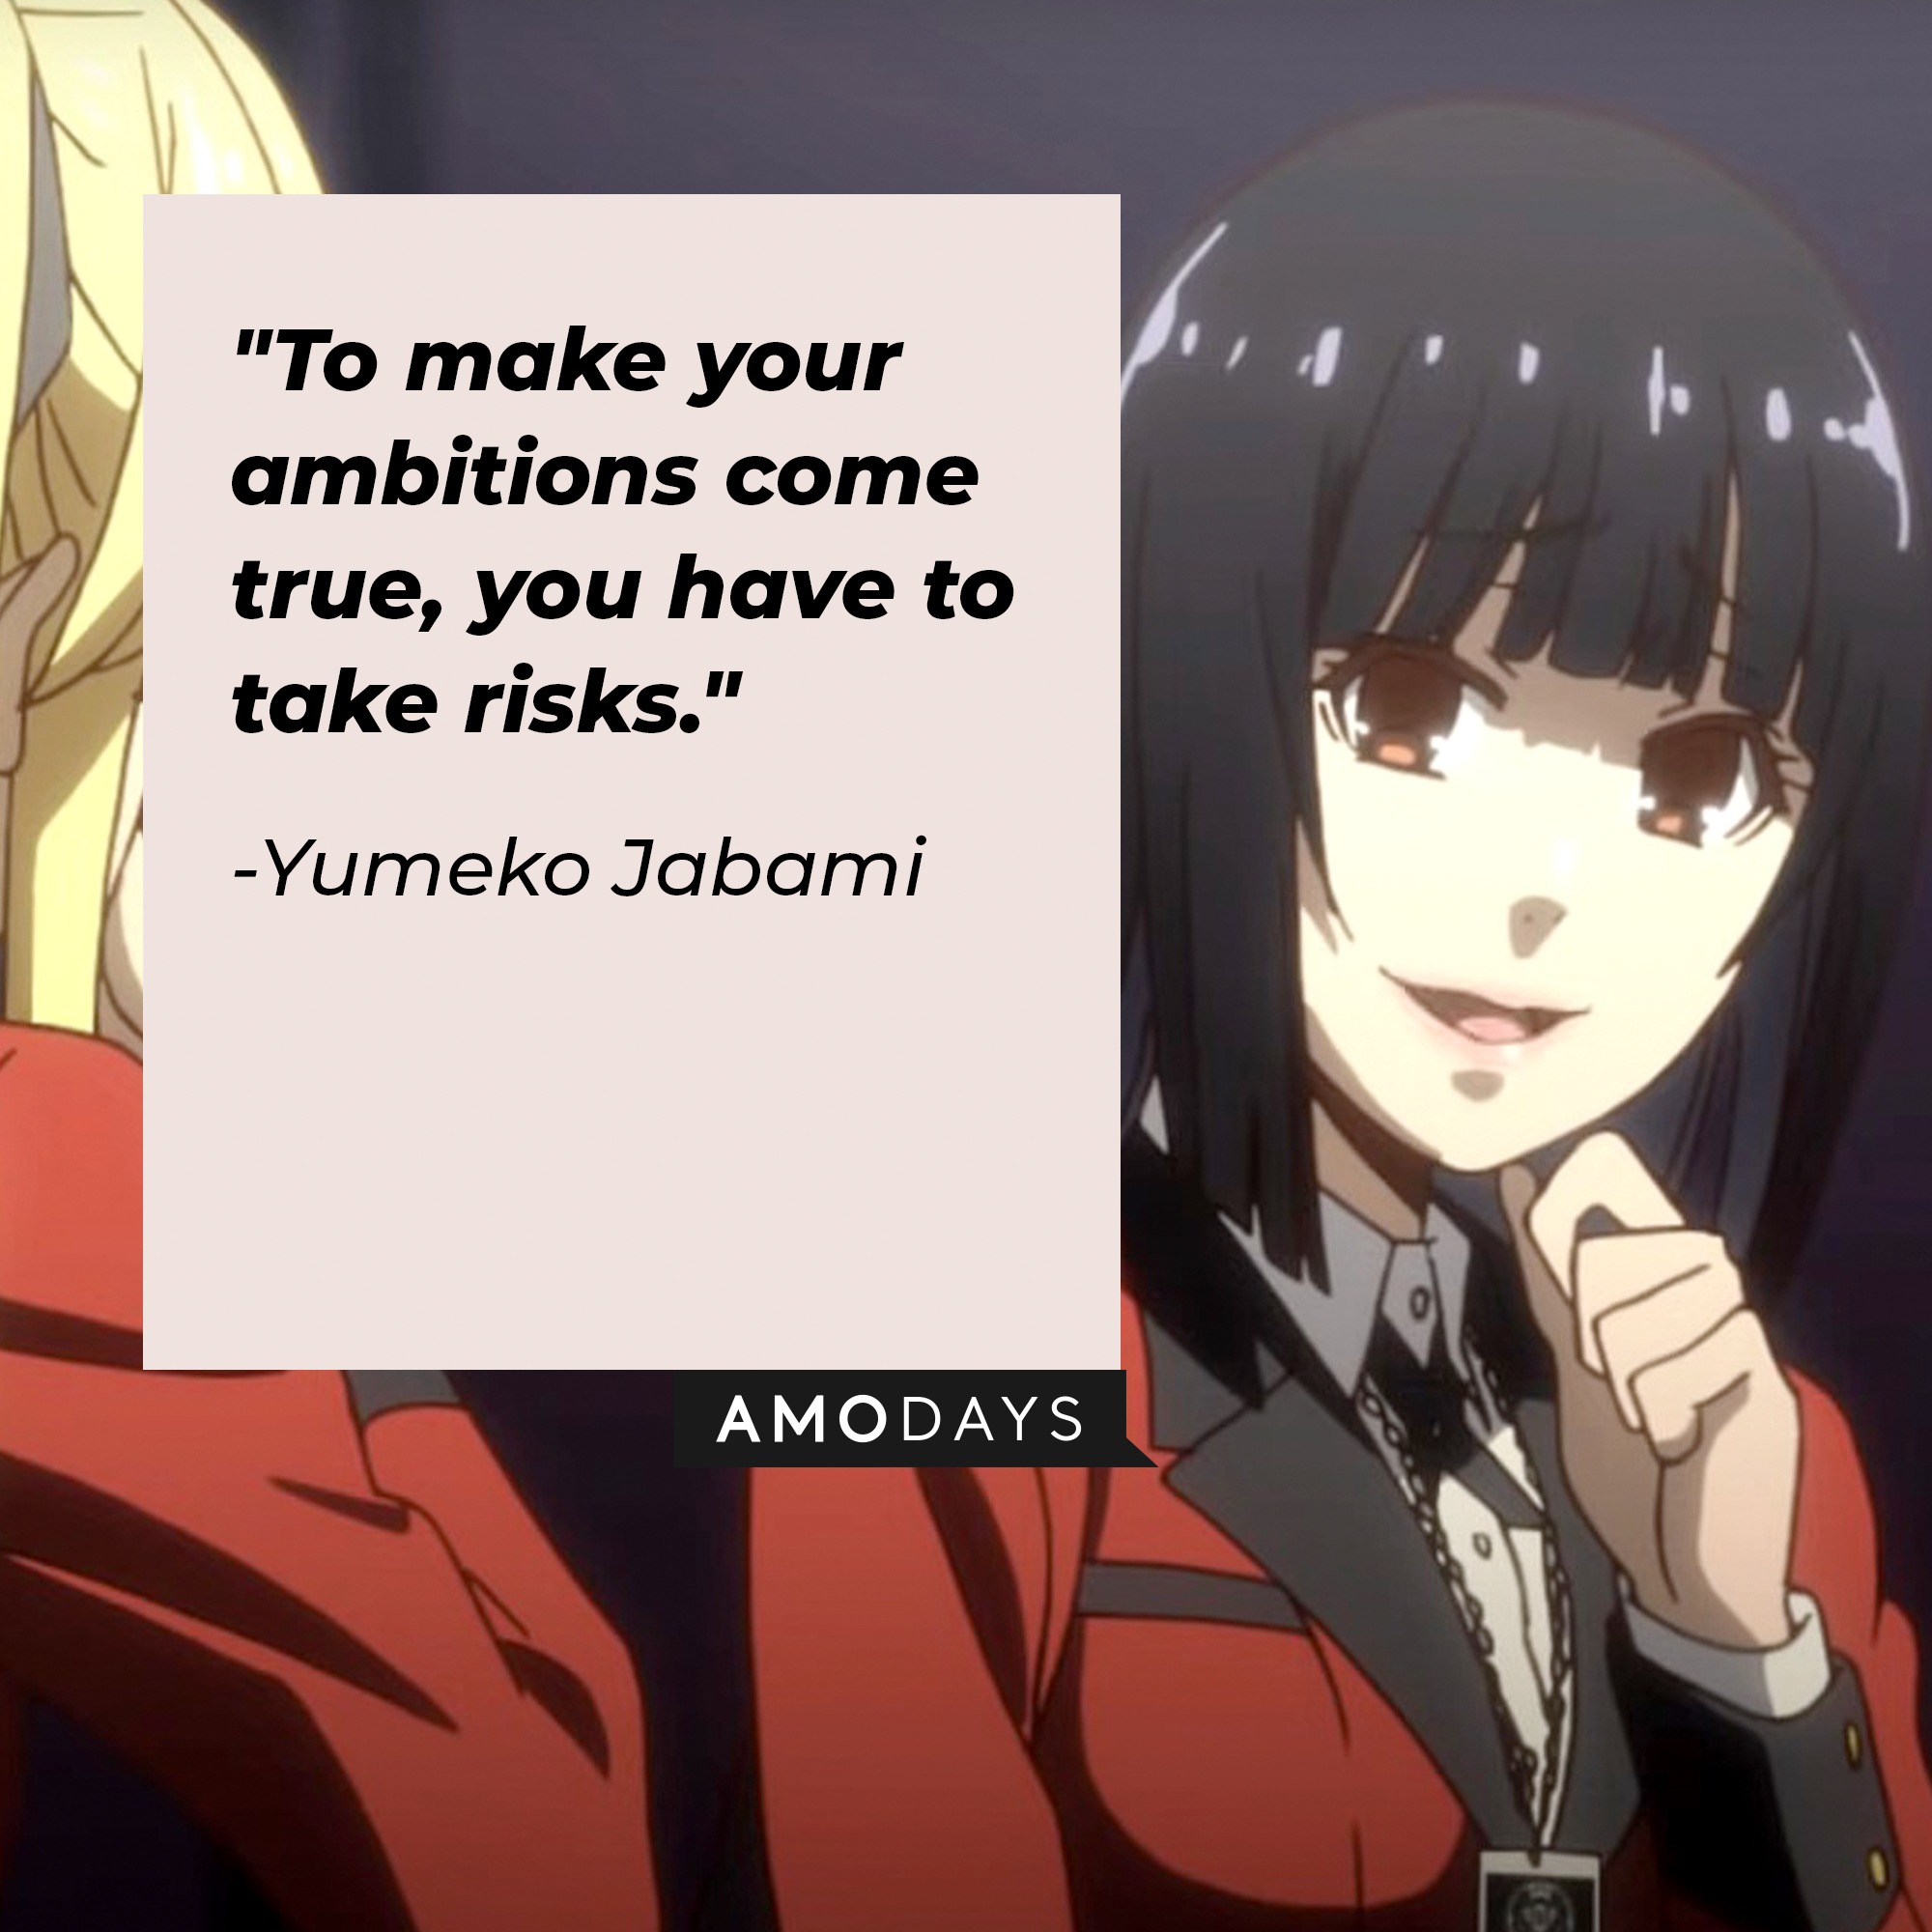 A picture of Yumeko Jabami with her quote: “To make your ambitions come true, you have to take risks." | Source: youtube.com/netflixanime